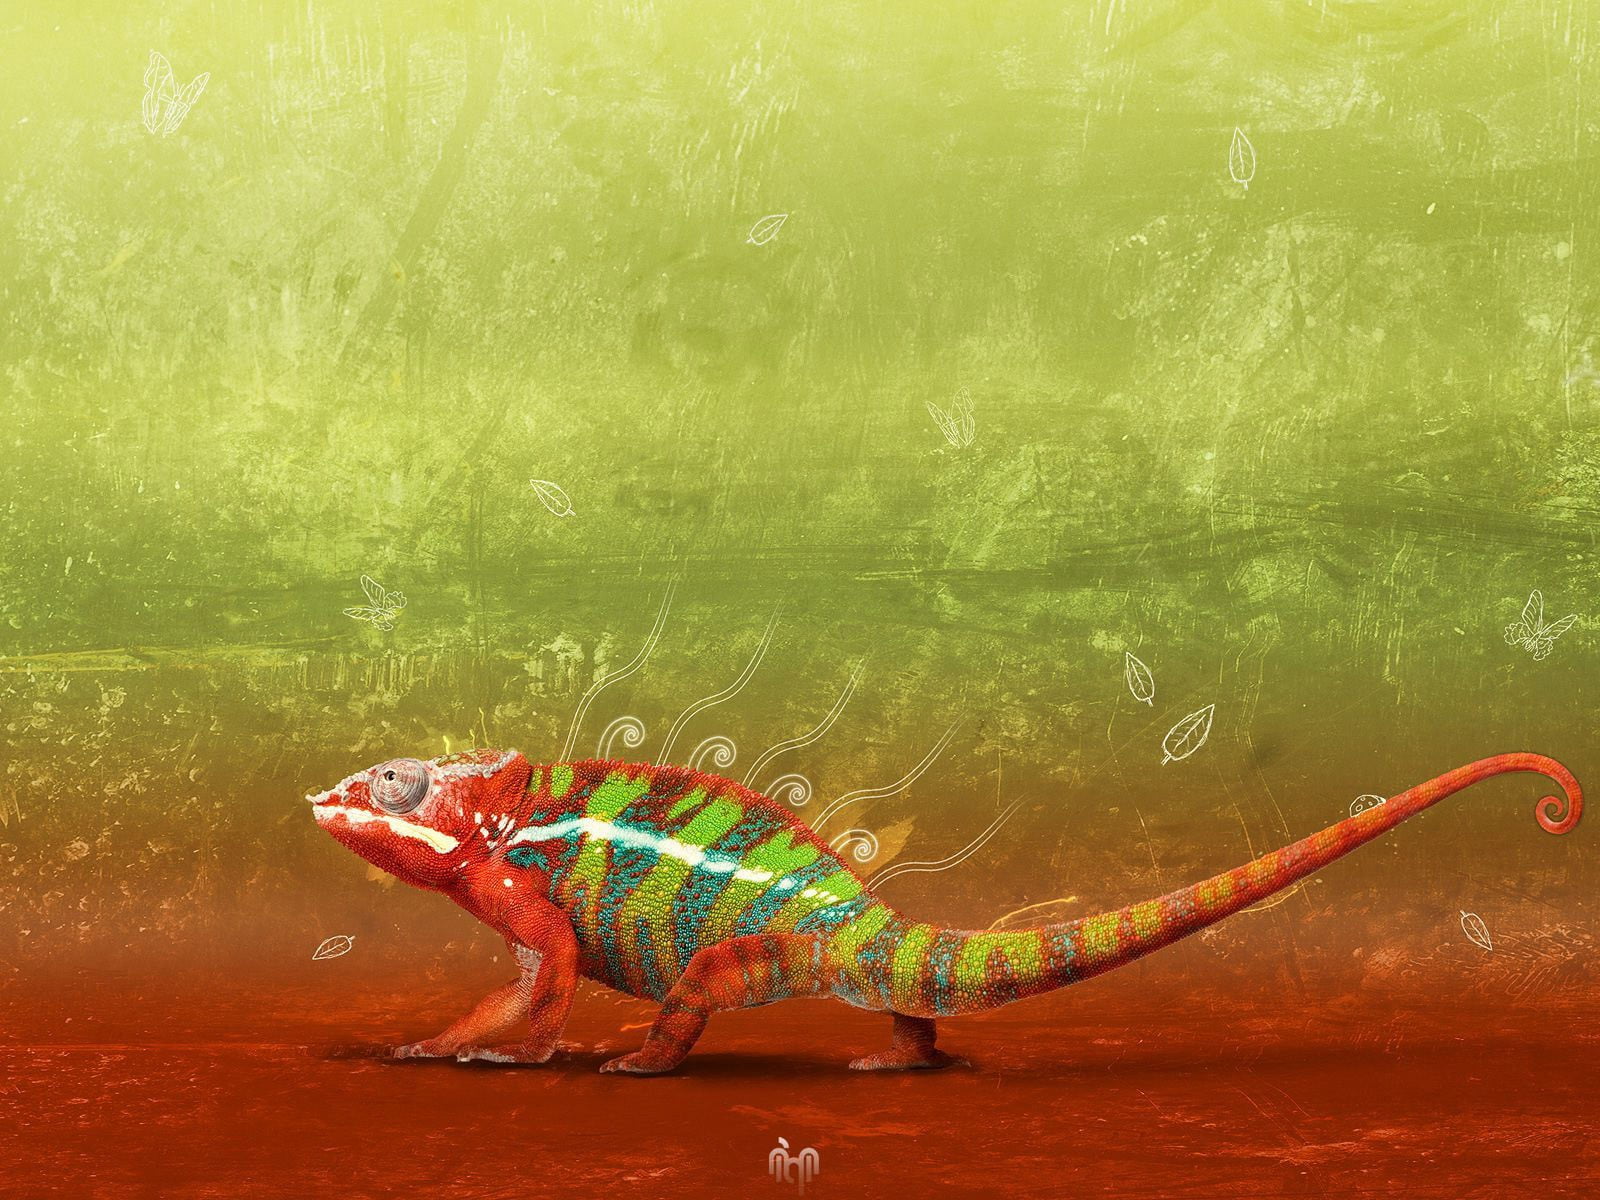 green and orange chameleon painting, nature, animals, reptiles